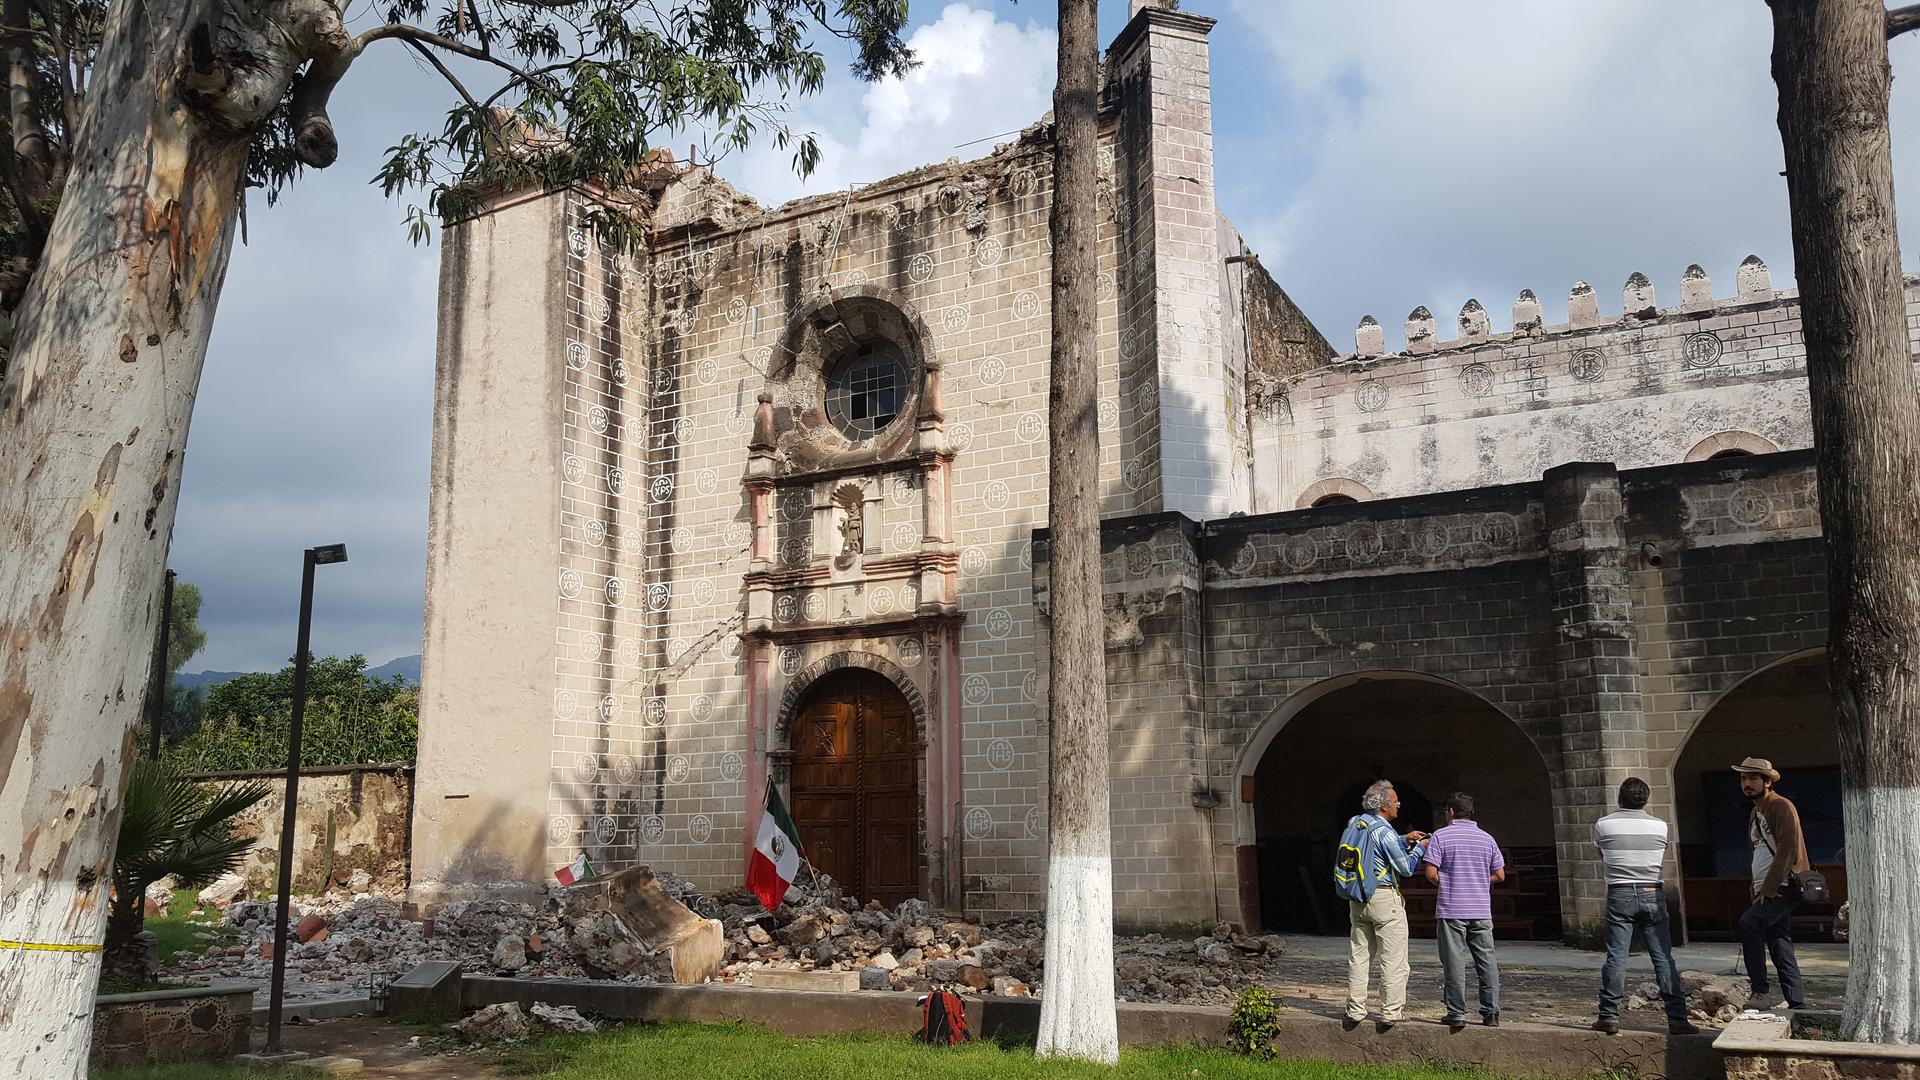 The exterior of the Ex-Convent of San Guillermo Abad, in Totolapan, Morelos state, Mexico. Behind the main facade, the chapel's roof collapsed over the main altar in the Sept. 19 earthquake.